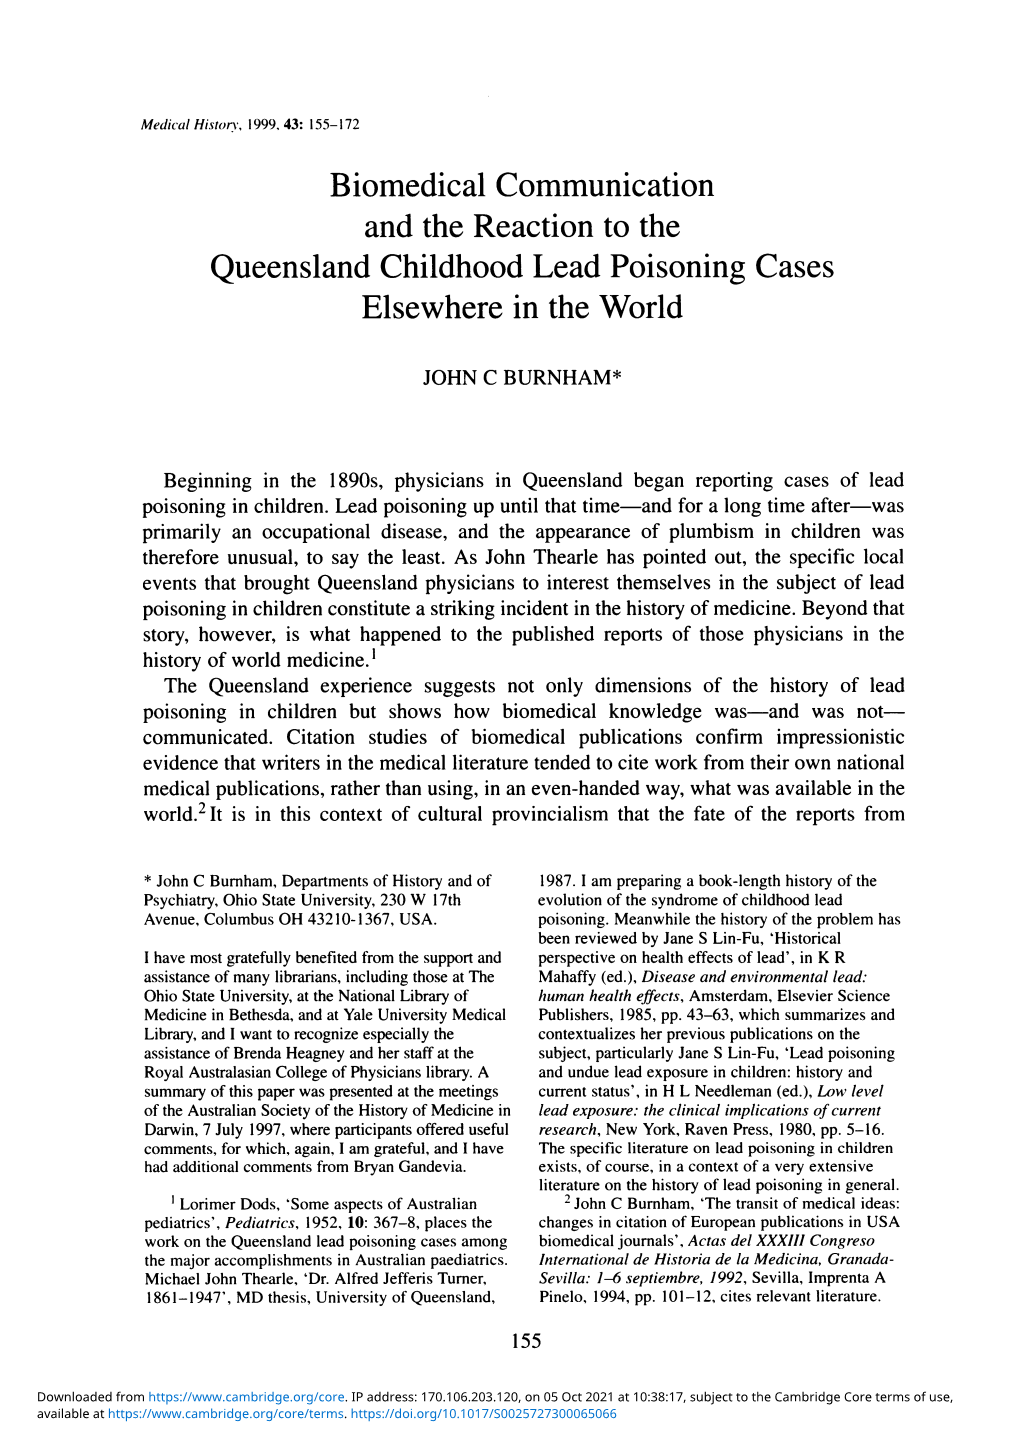 Biomedical Communication and the Reaction to the Queensland Childhood Lead Poisoning Cases Elsewhere in the World